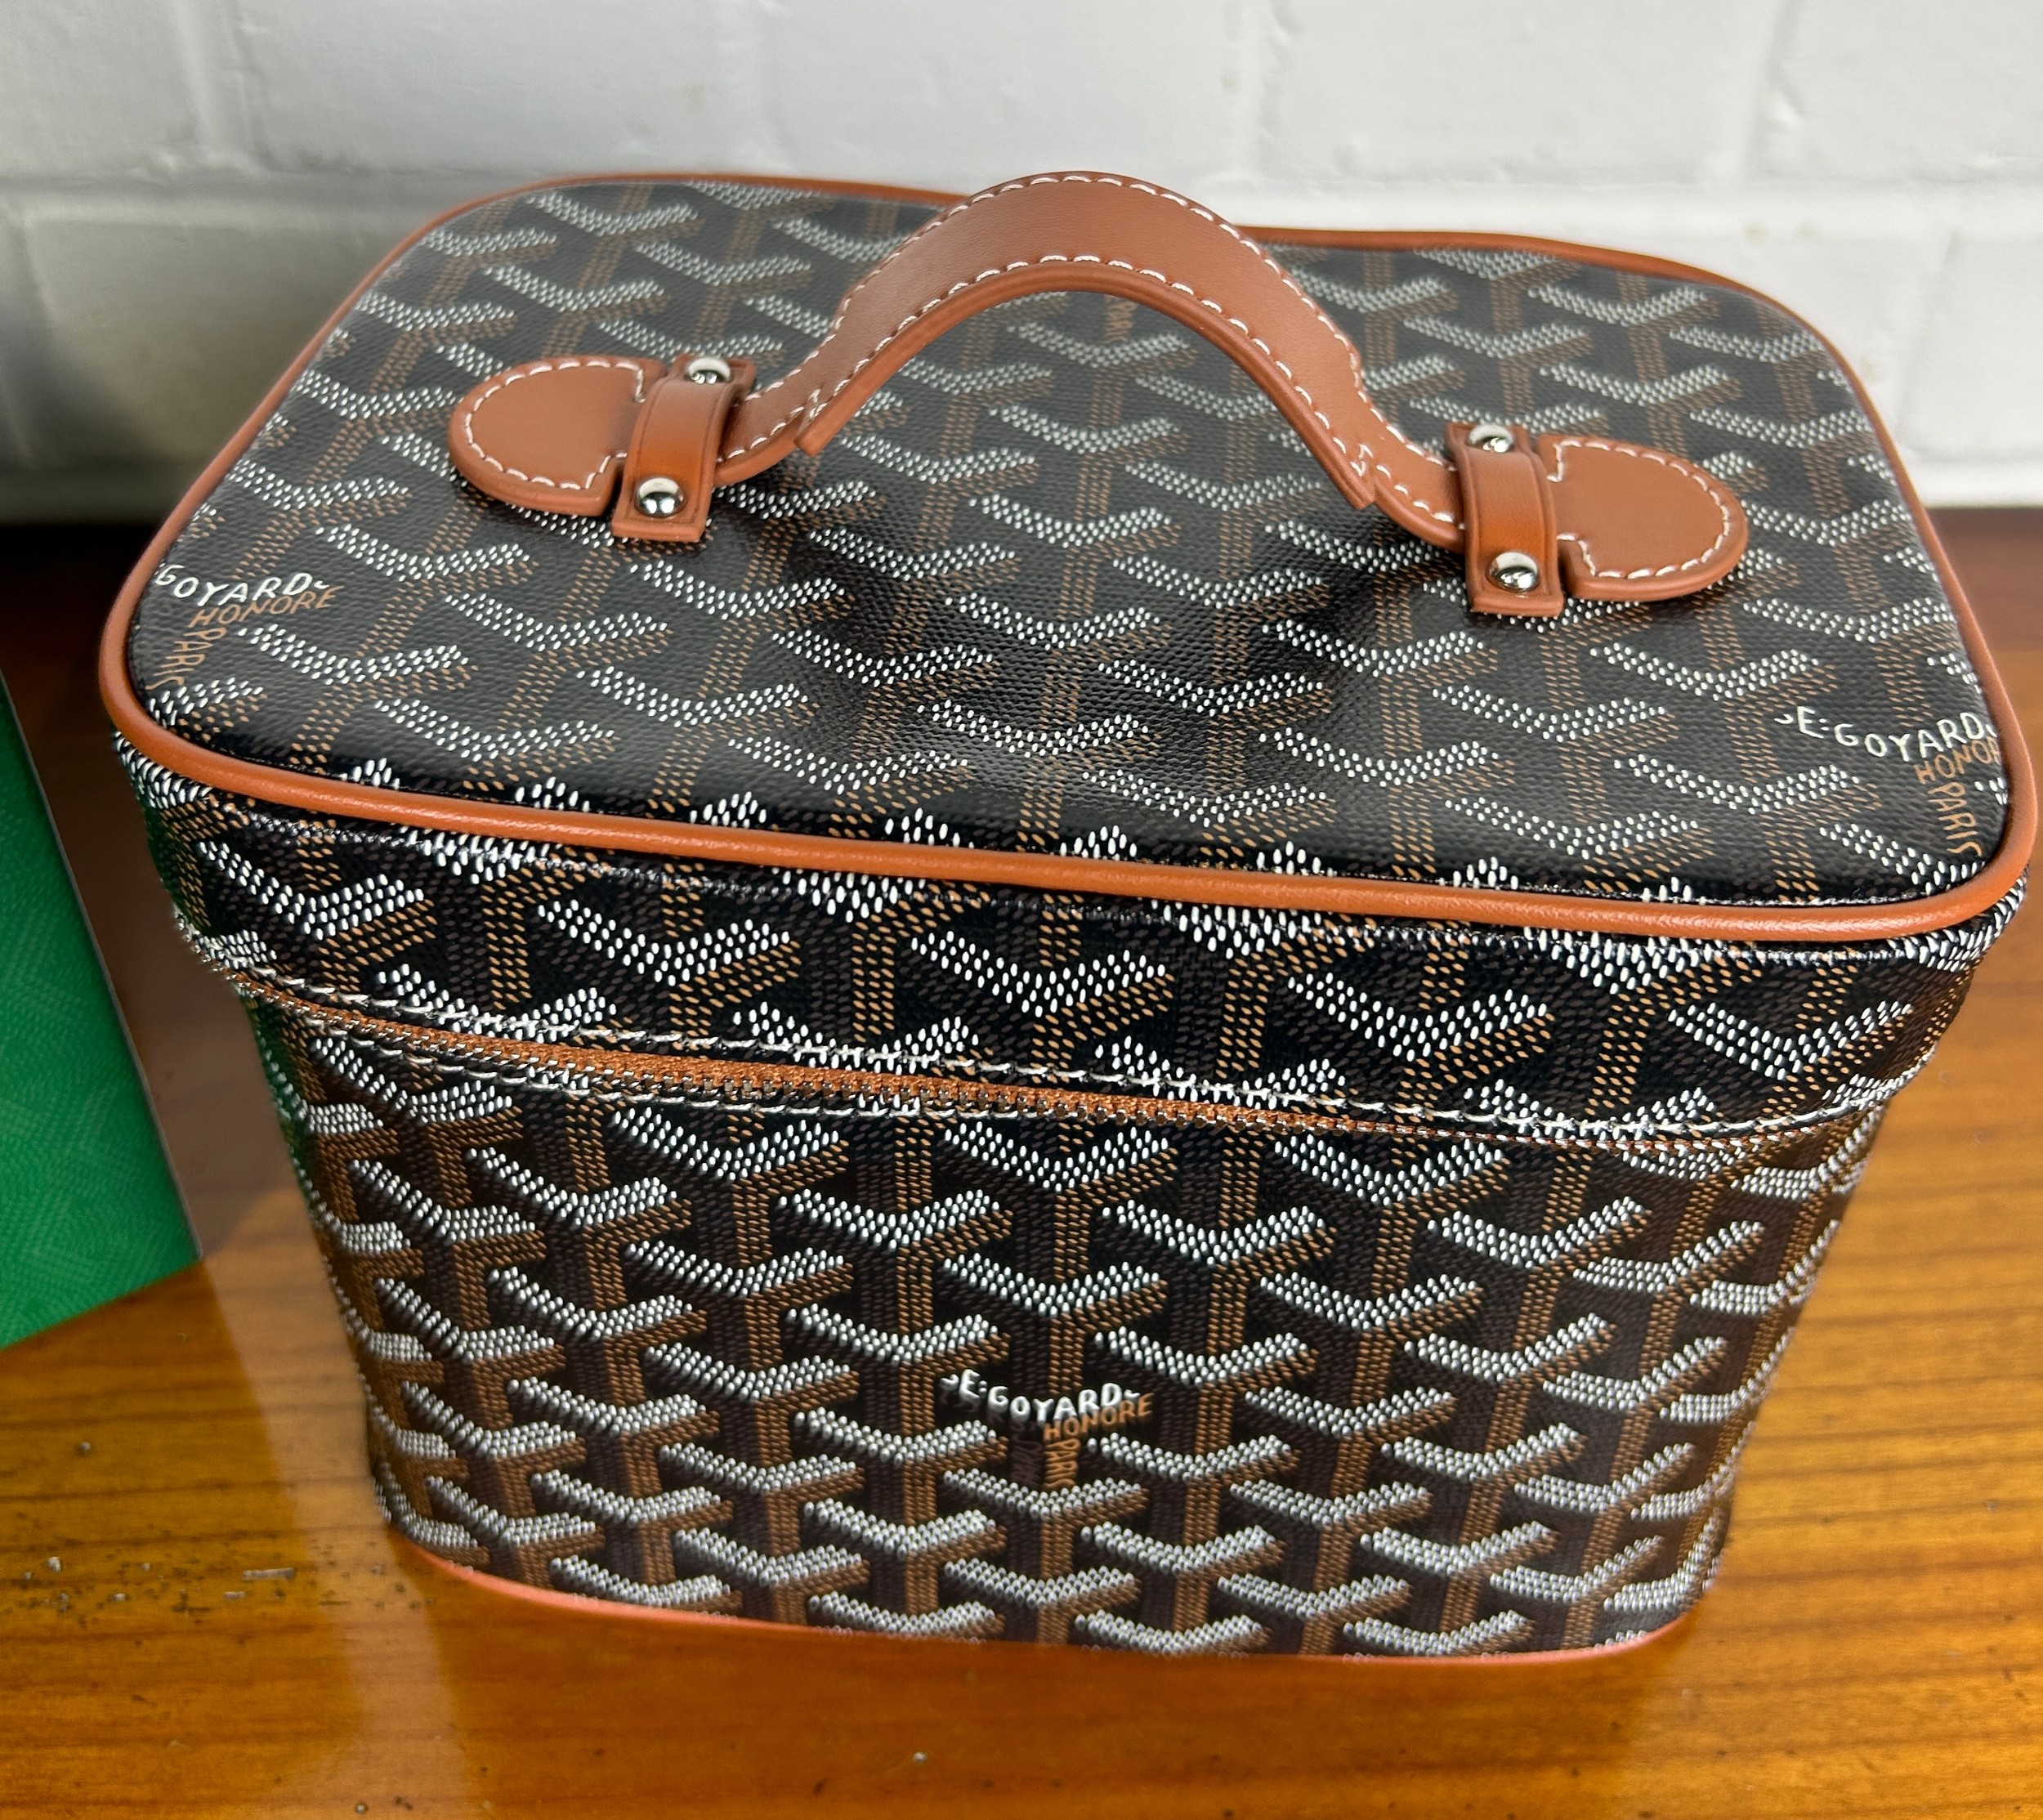 A GOYARD MUSE VANITY CASE IN BLACK AND TAN, With box. - Image 2 of 7